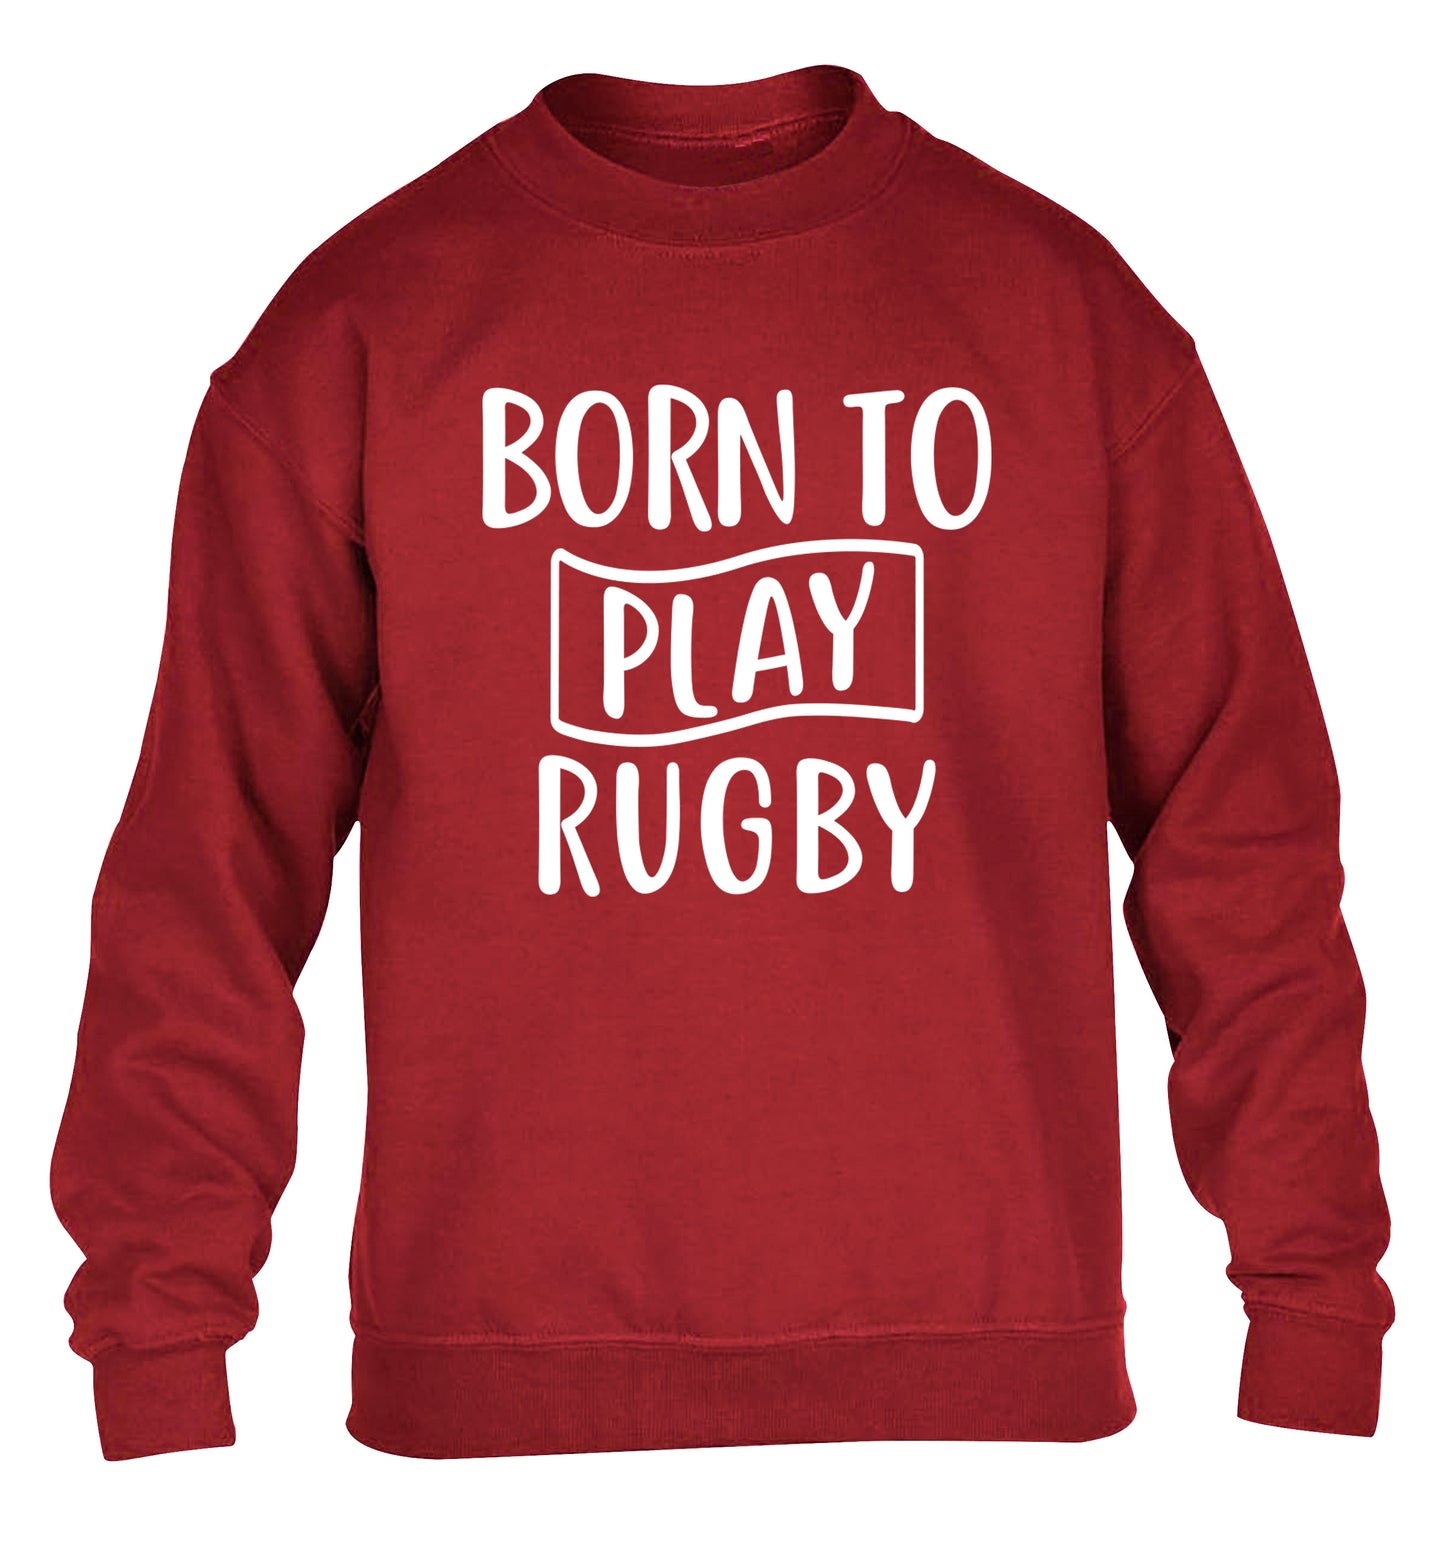 Born to play rugby children's grey sweater 12-13 Years